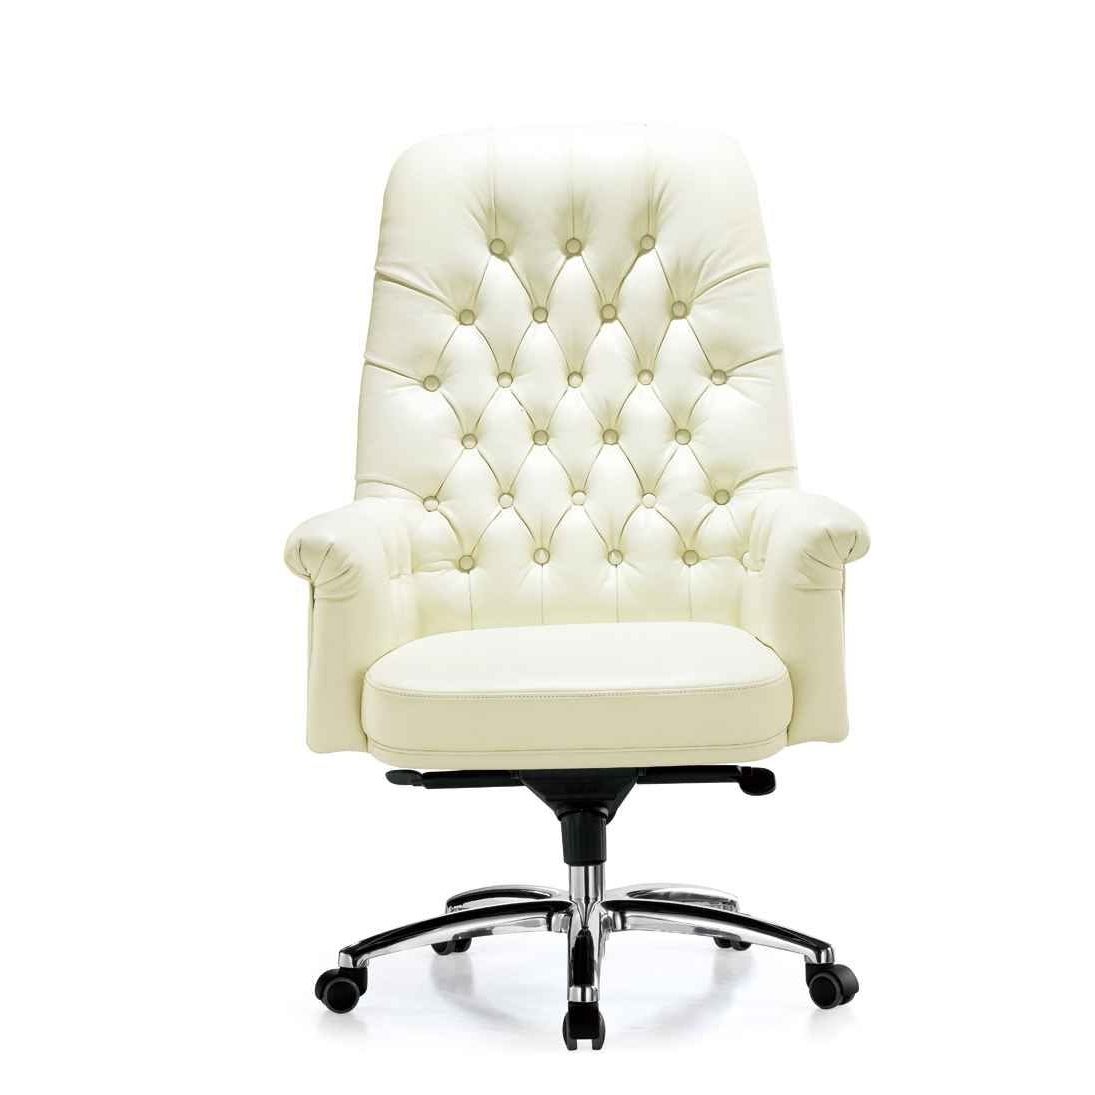 Famous Executive Office Chairs With Flip Up Arms With Chair : High Back White Leather Executive Office Chair With Flip (View 17 of 20)